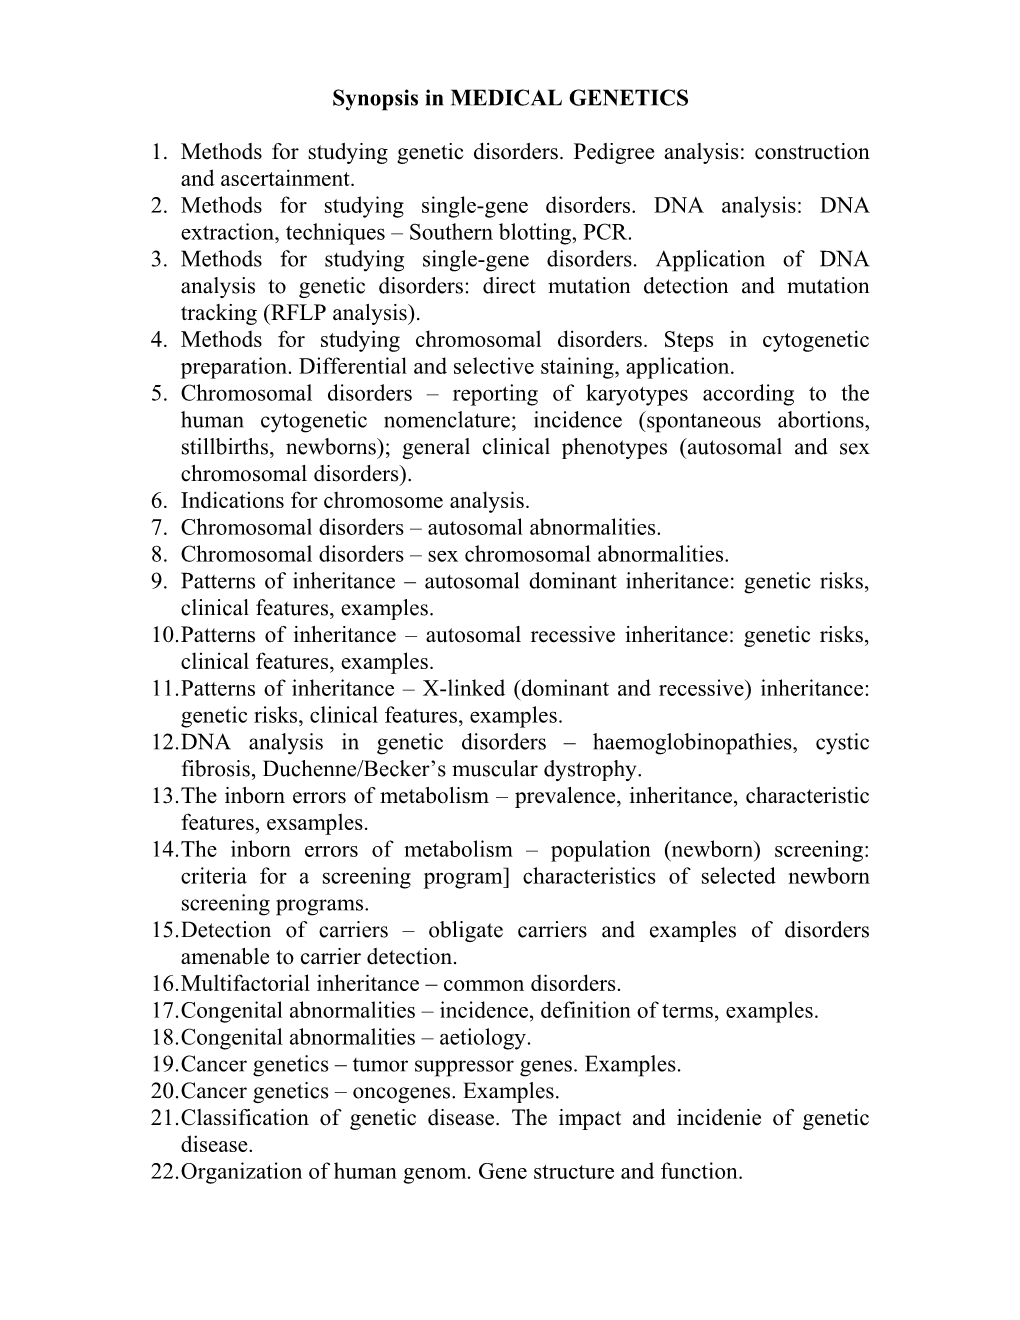 Synopsis in MEDICAL GENETICS for the Academic Year 2001-2002